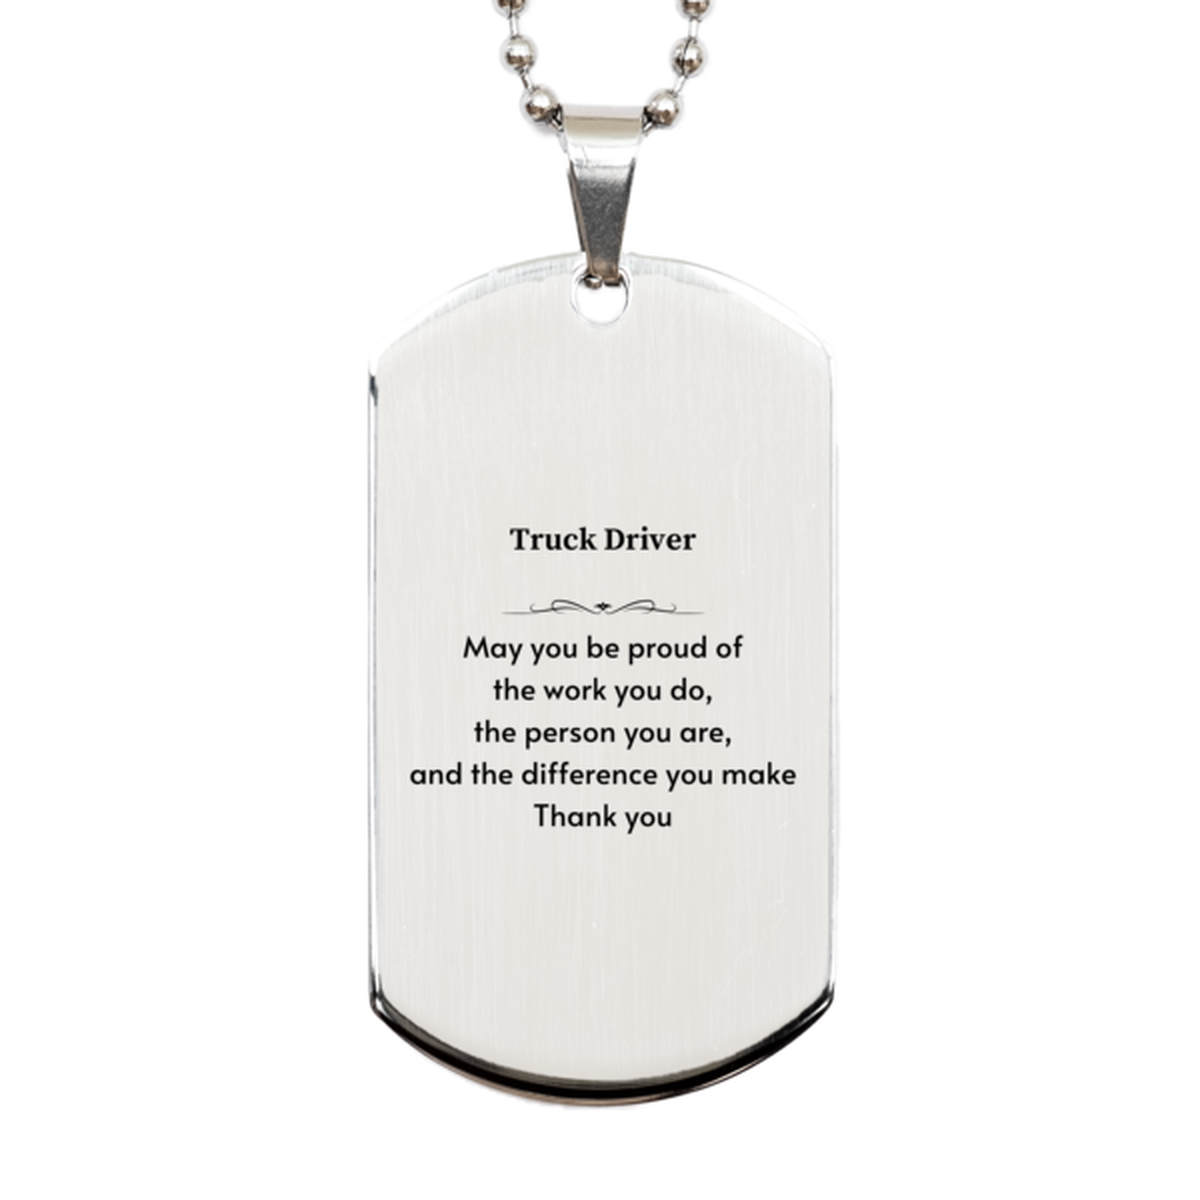 Heartwarming Silver Dog Tag Retirement Coworkers Gifts for Truck Driver, Truck Driver May You be proud of the work you do, the person you are Gifts for Boss Men Women Friends